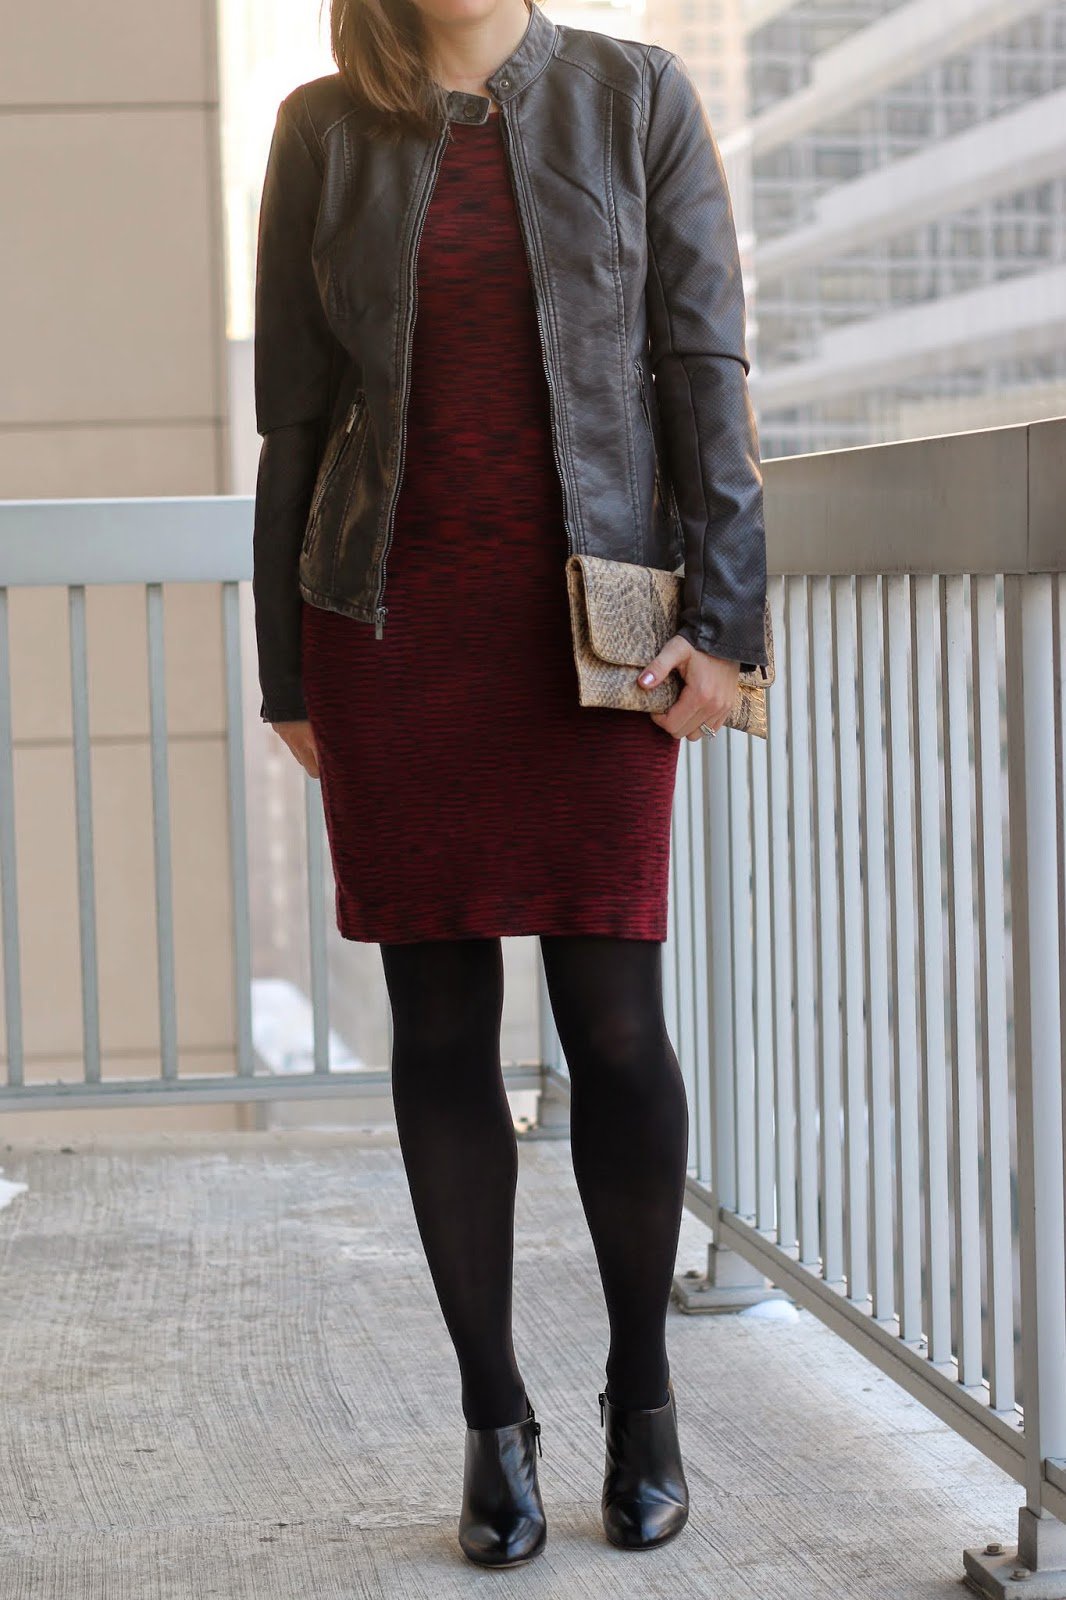 FashionablyEmployed.com | Valentine's Day Style: Desk to Dinner Date | Red sweater dress, black tights and booties, gray moto jacket or gray blazer | work to weekend style